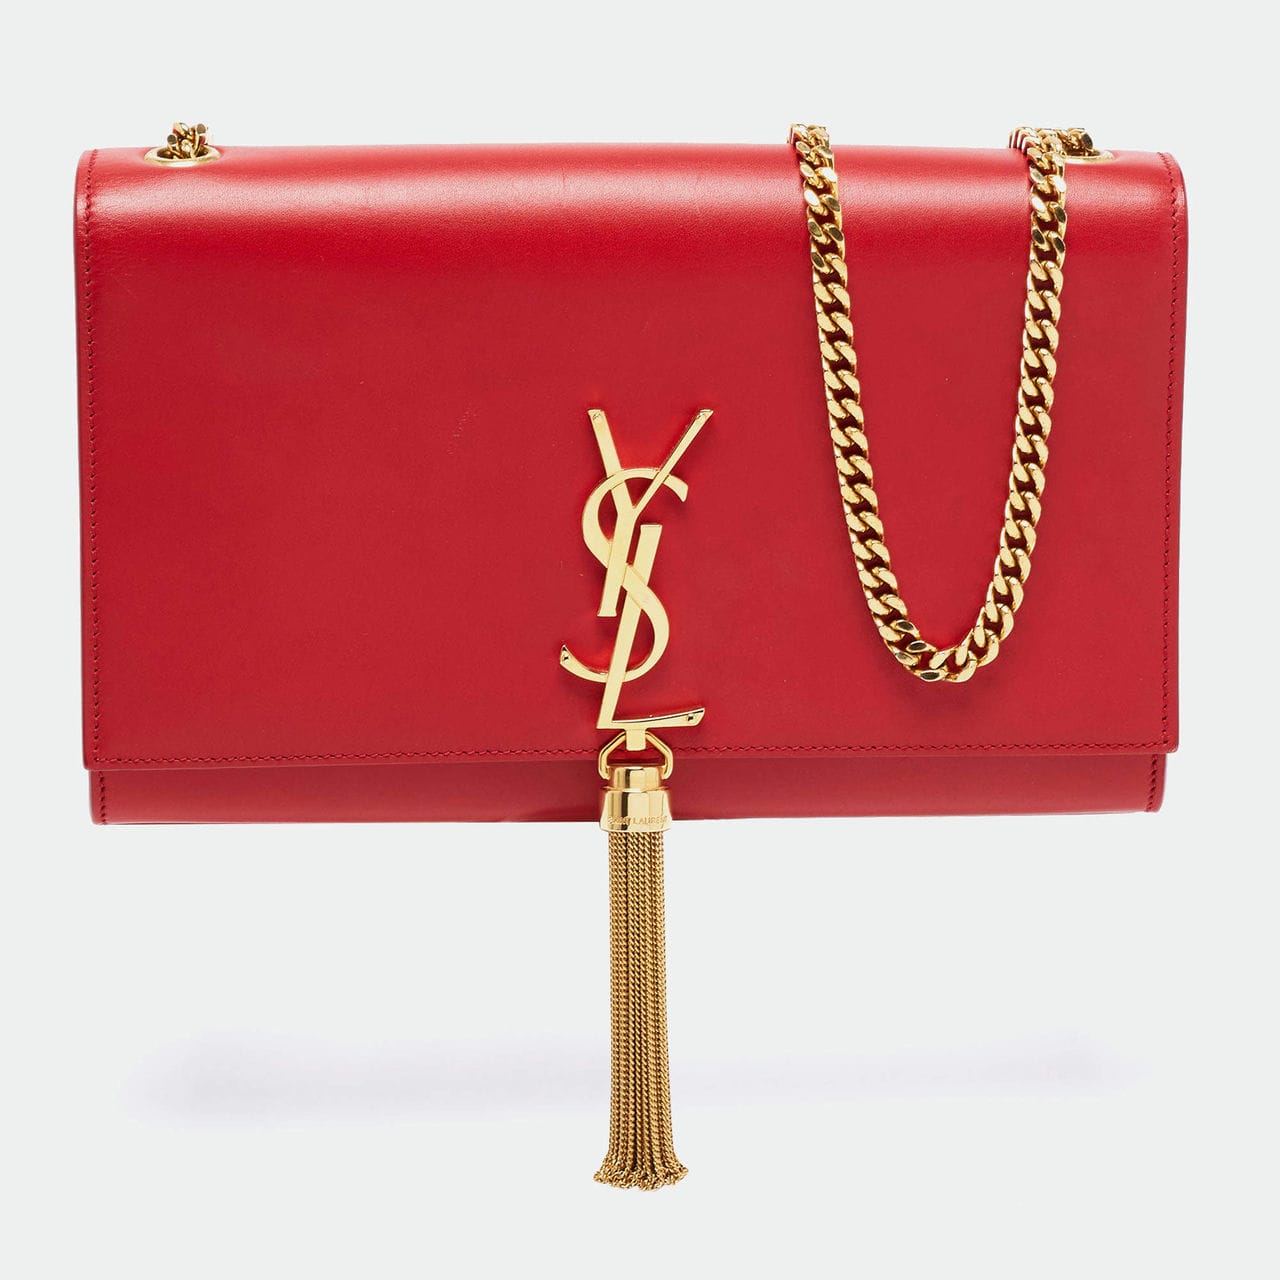 Step 7: Analyze the text on the buttons of your YSL Kate bag